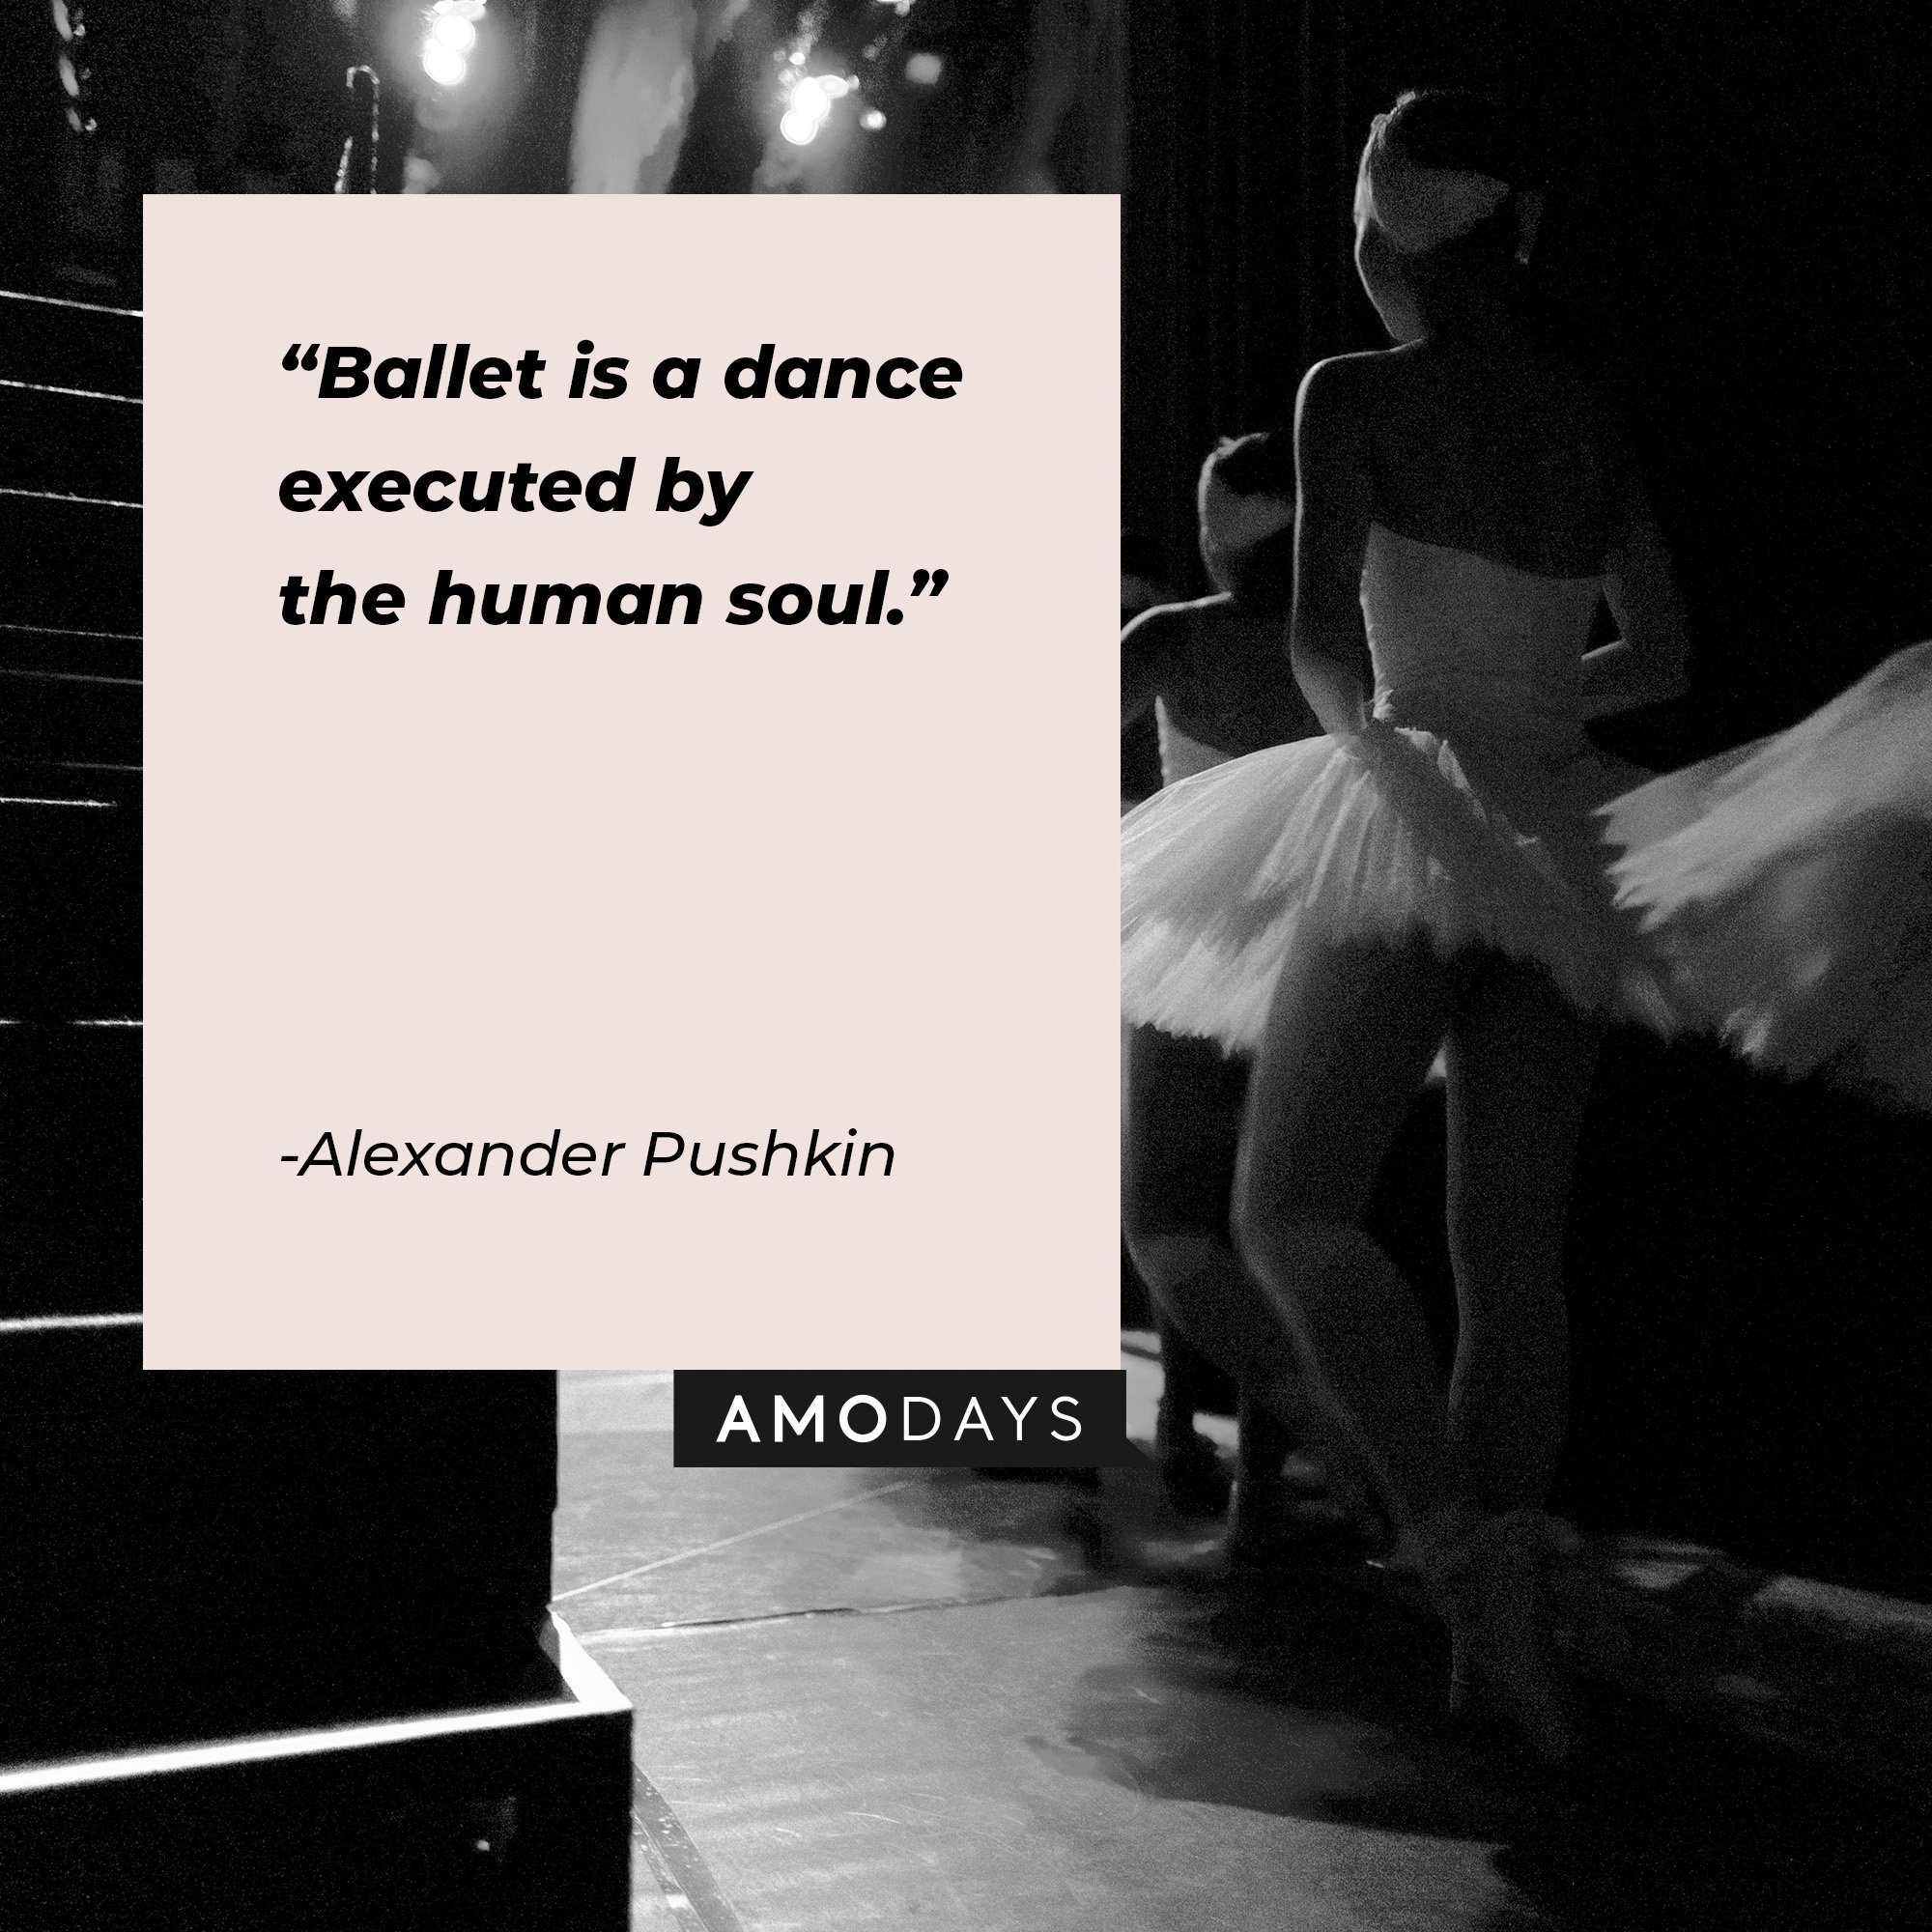 Alexander Pushkin's quote: "Ballet is a dance executed by the human soul." | Image: AmoDays